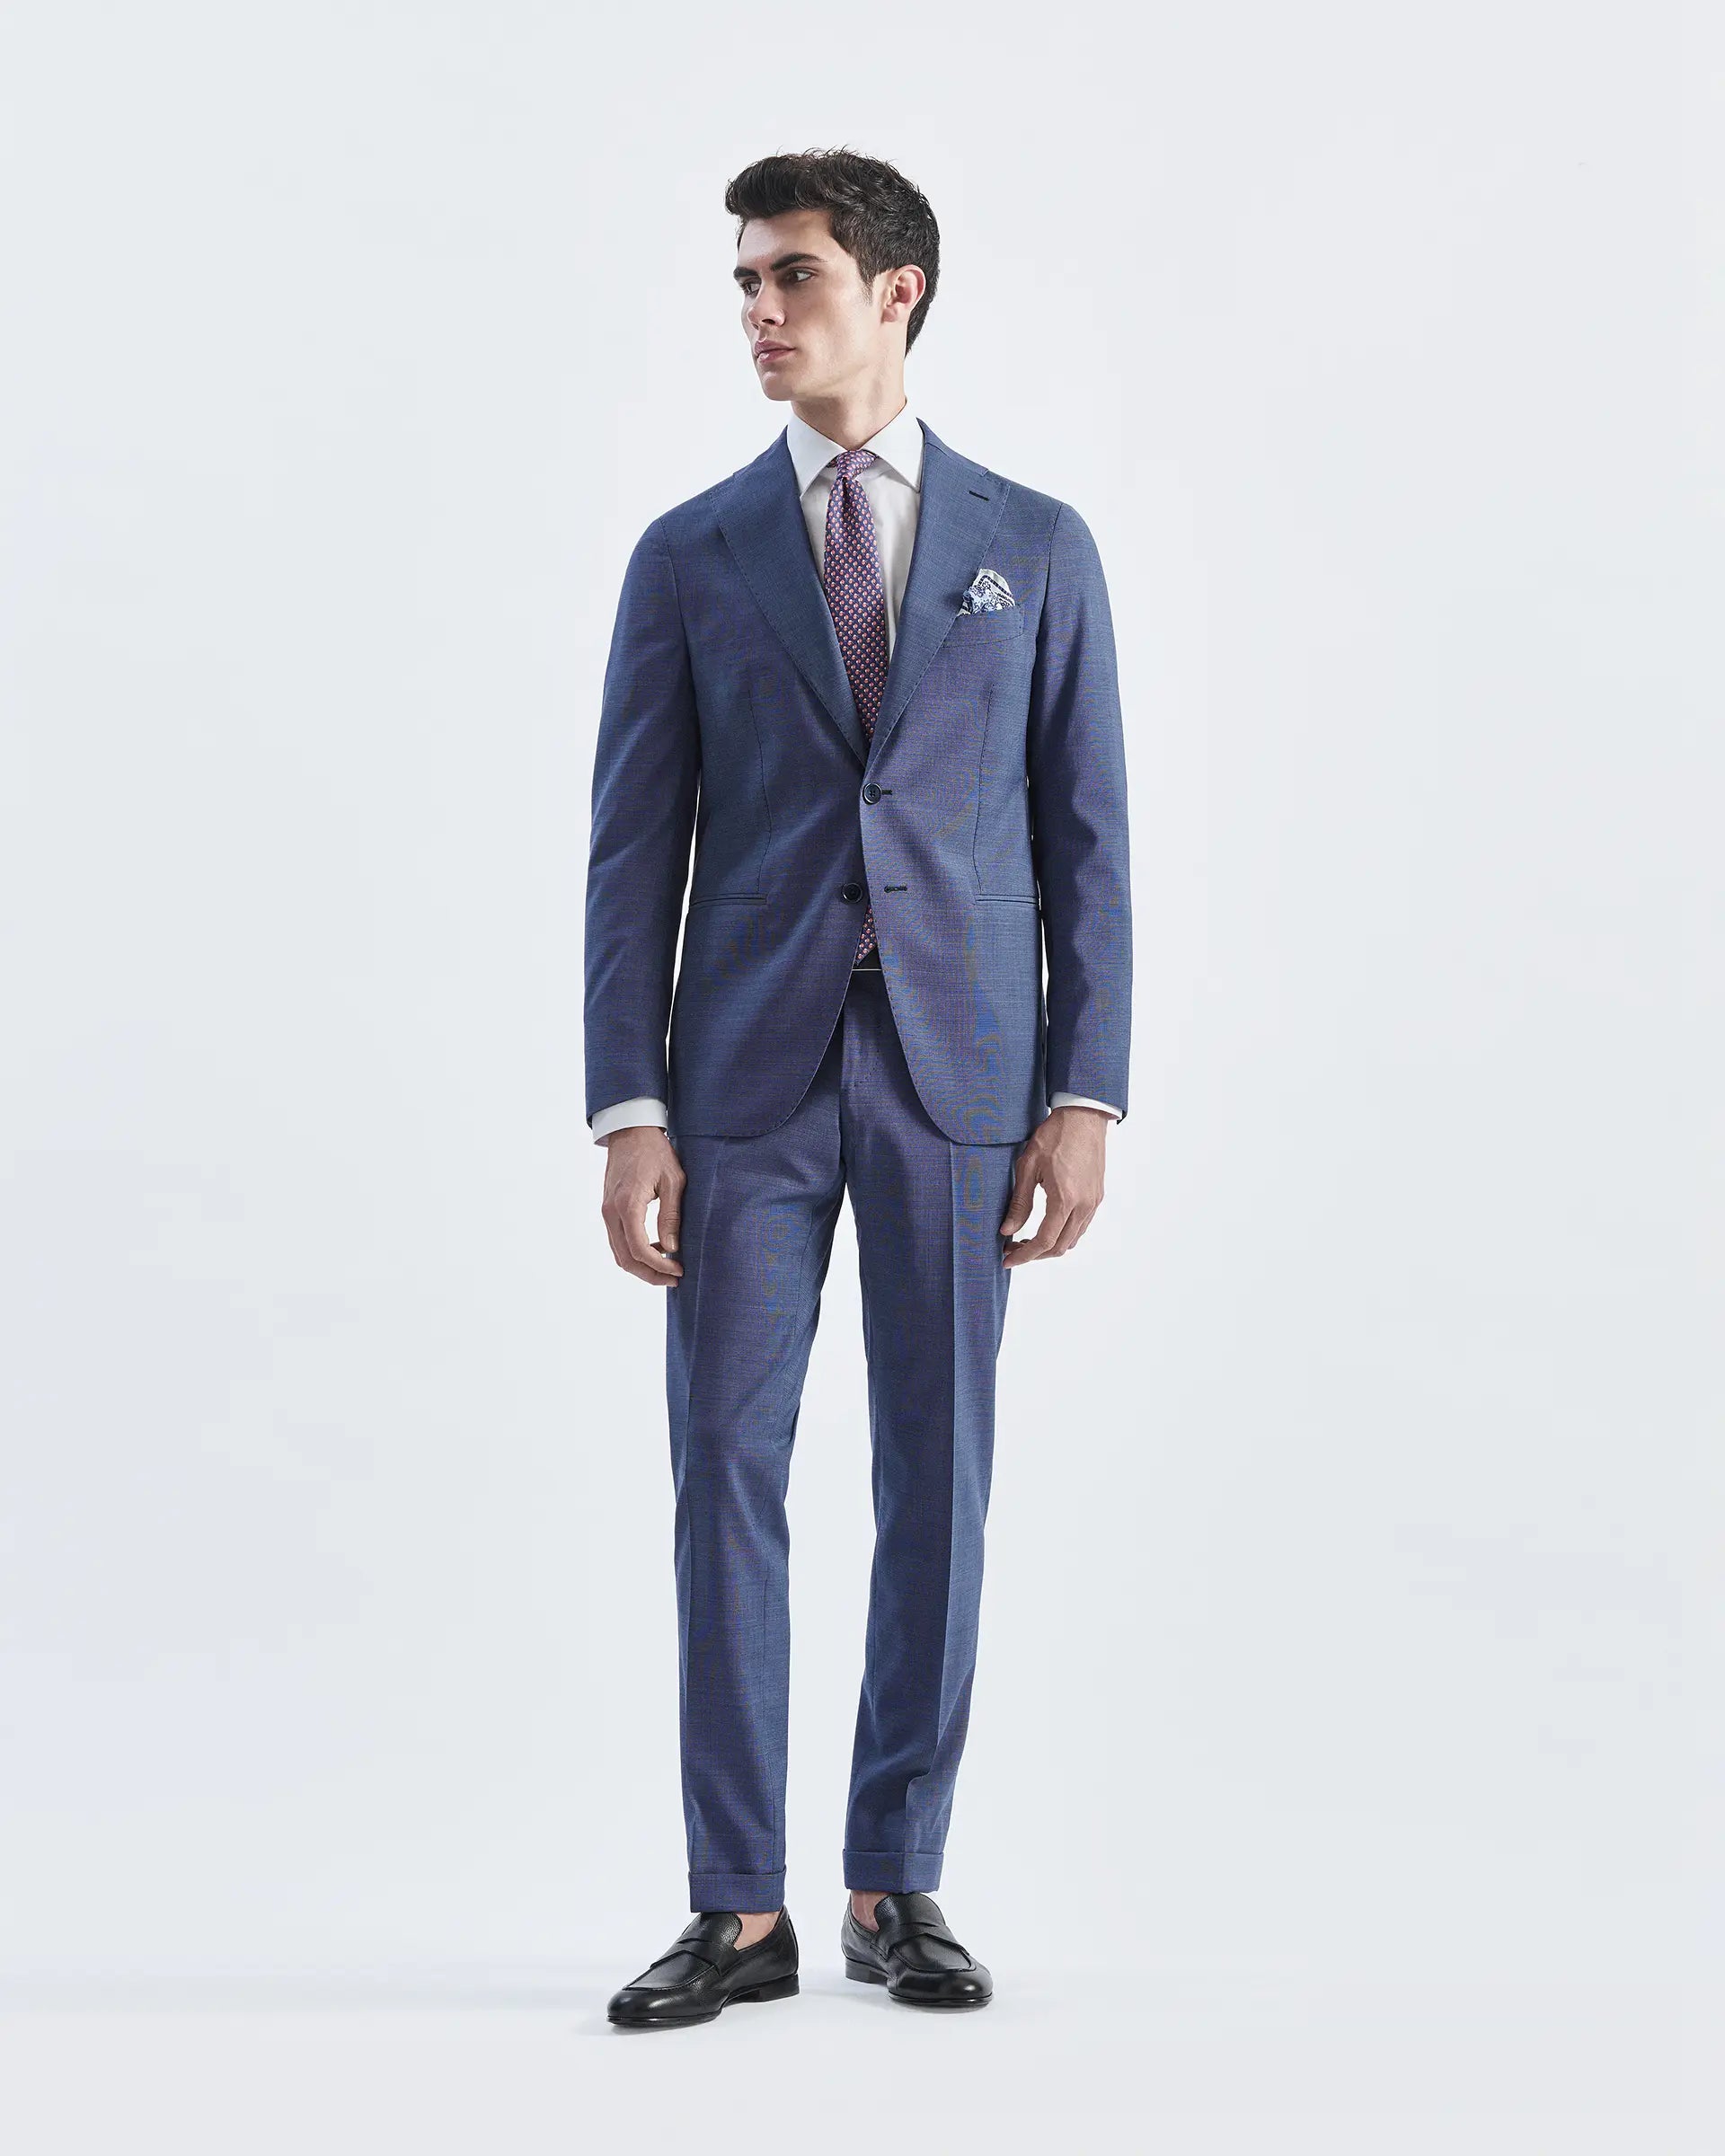 Avion suit in pure wool Tollegno fabric